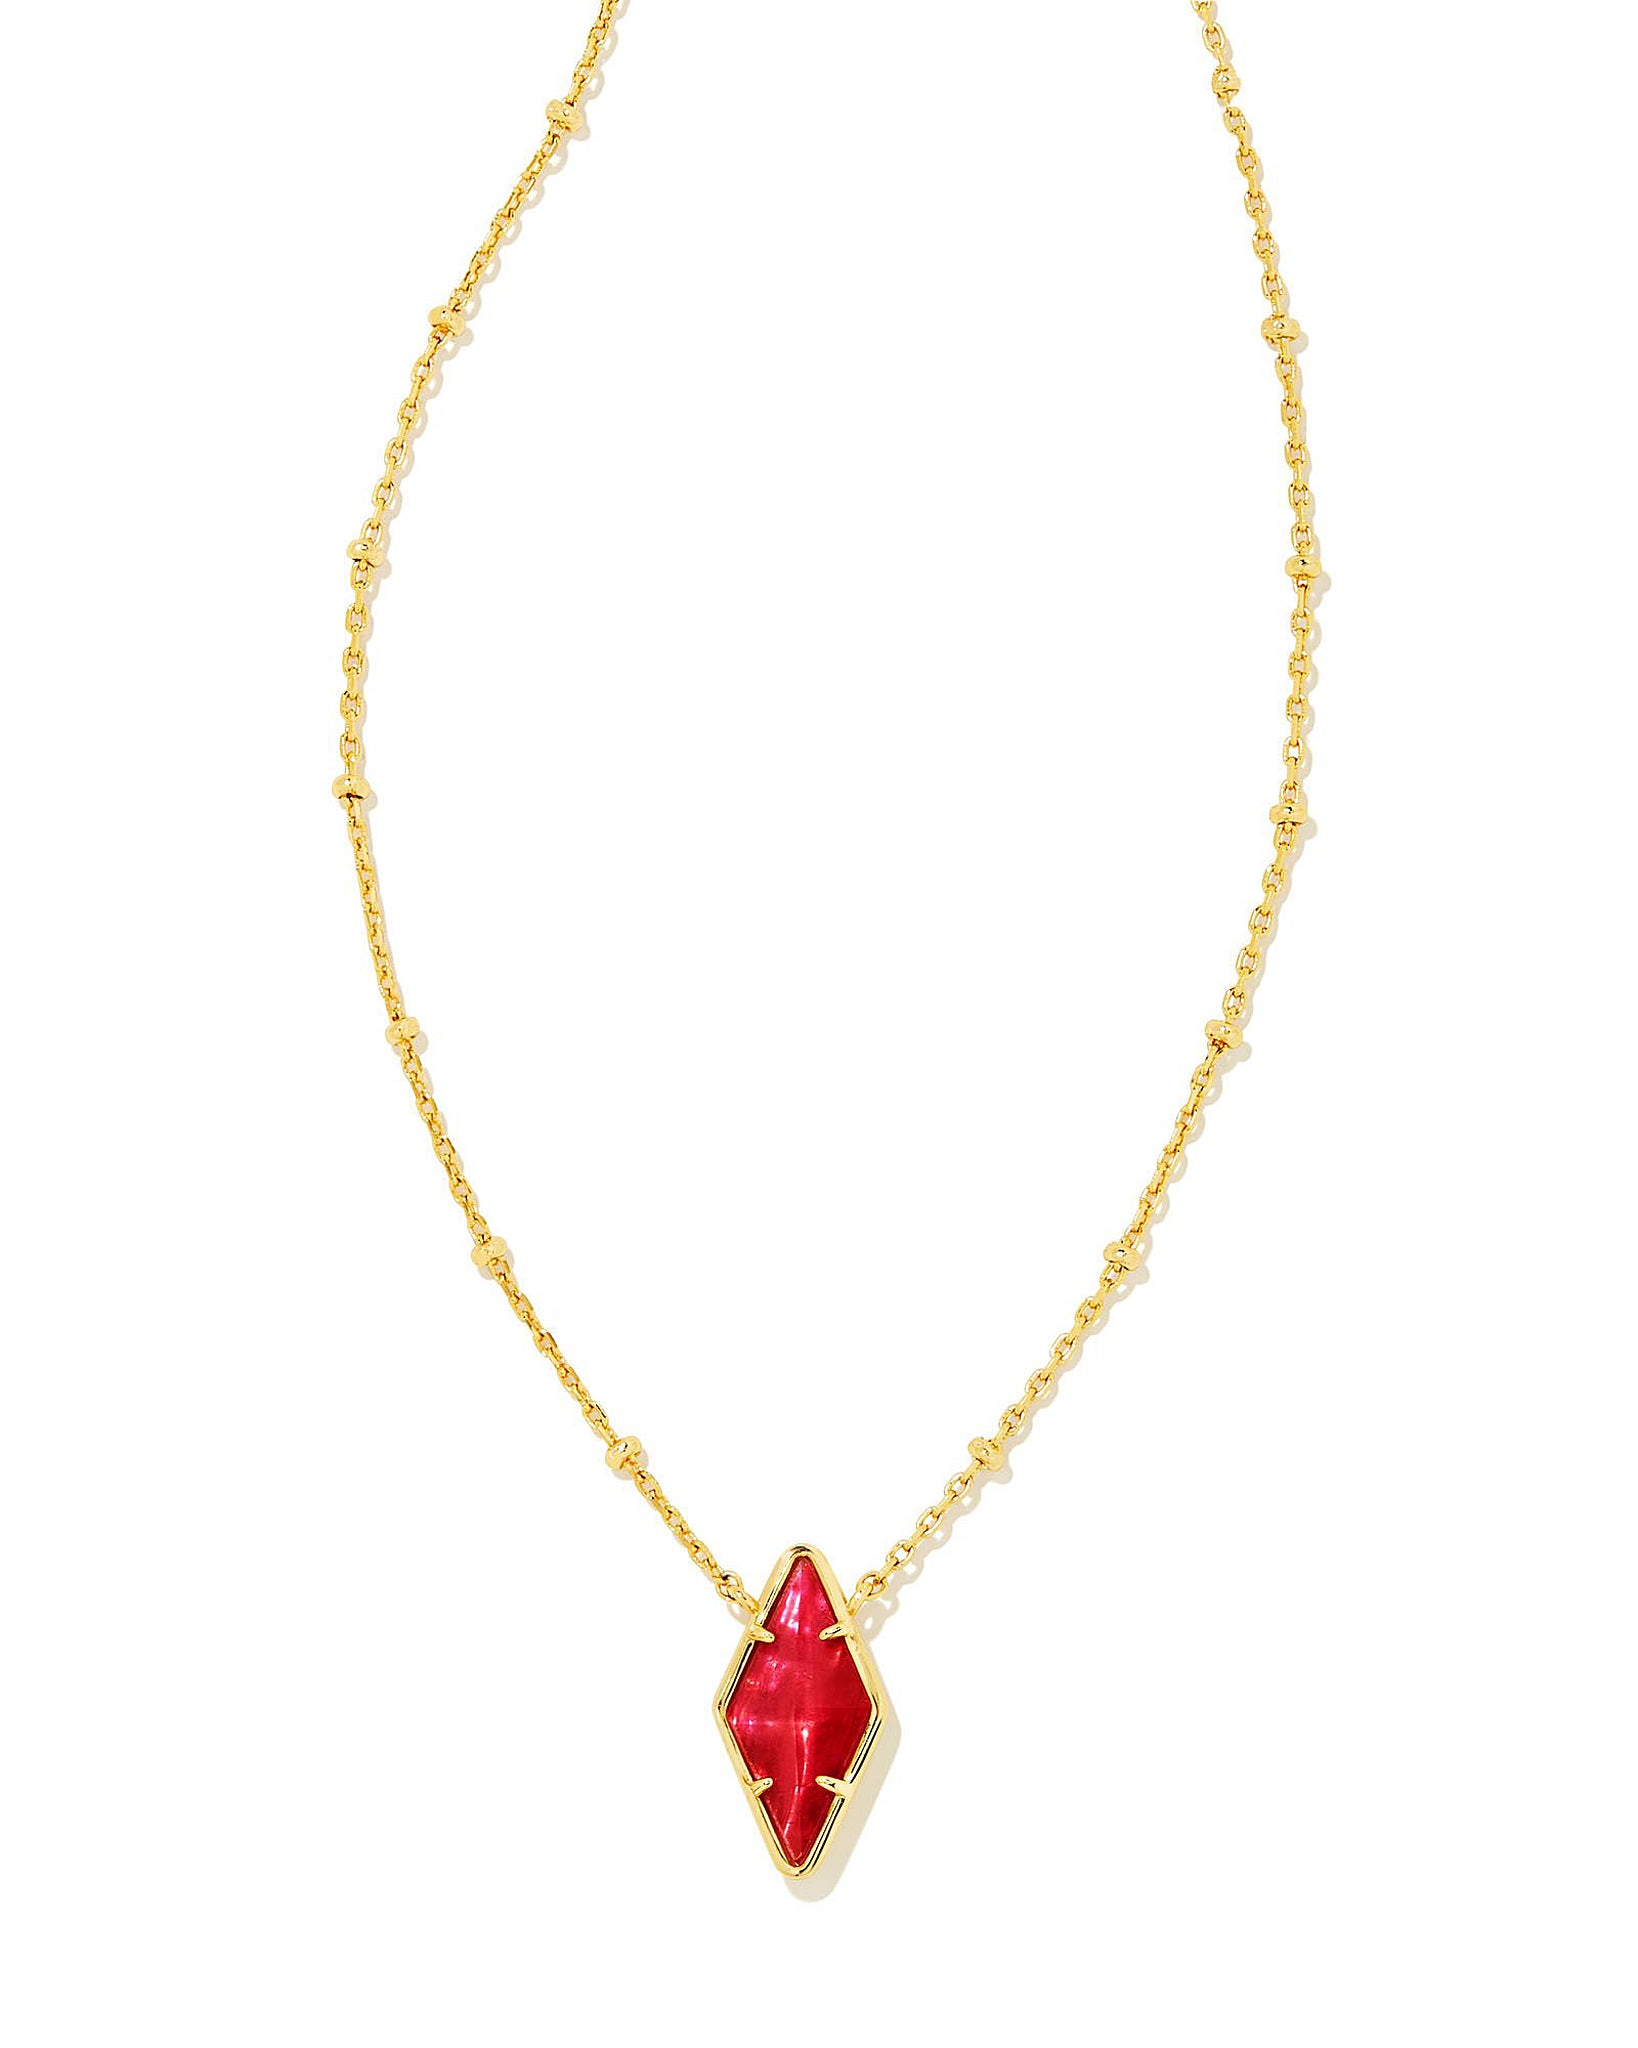 Kendra Scott Kinsley Pendant Necklace in Raspberry Illusion and Gold Plated